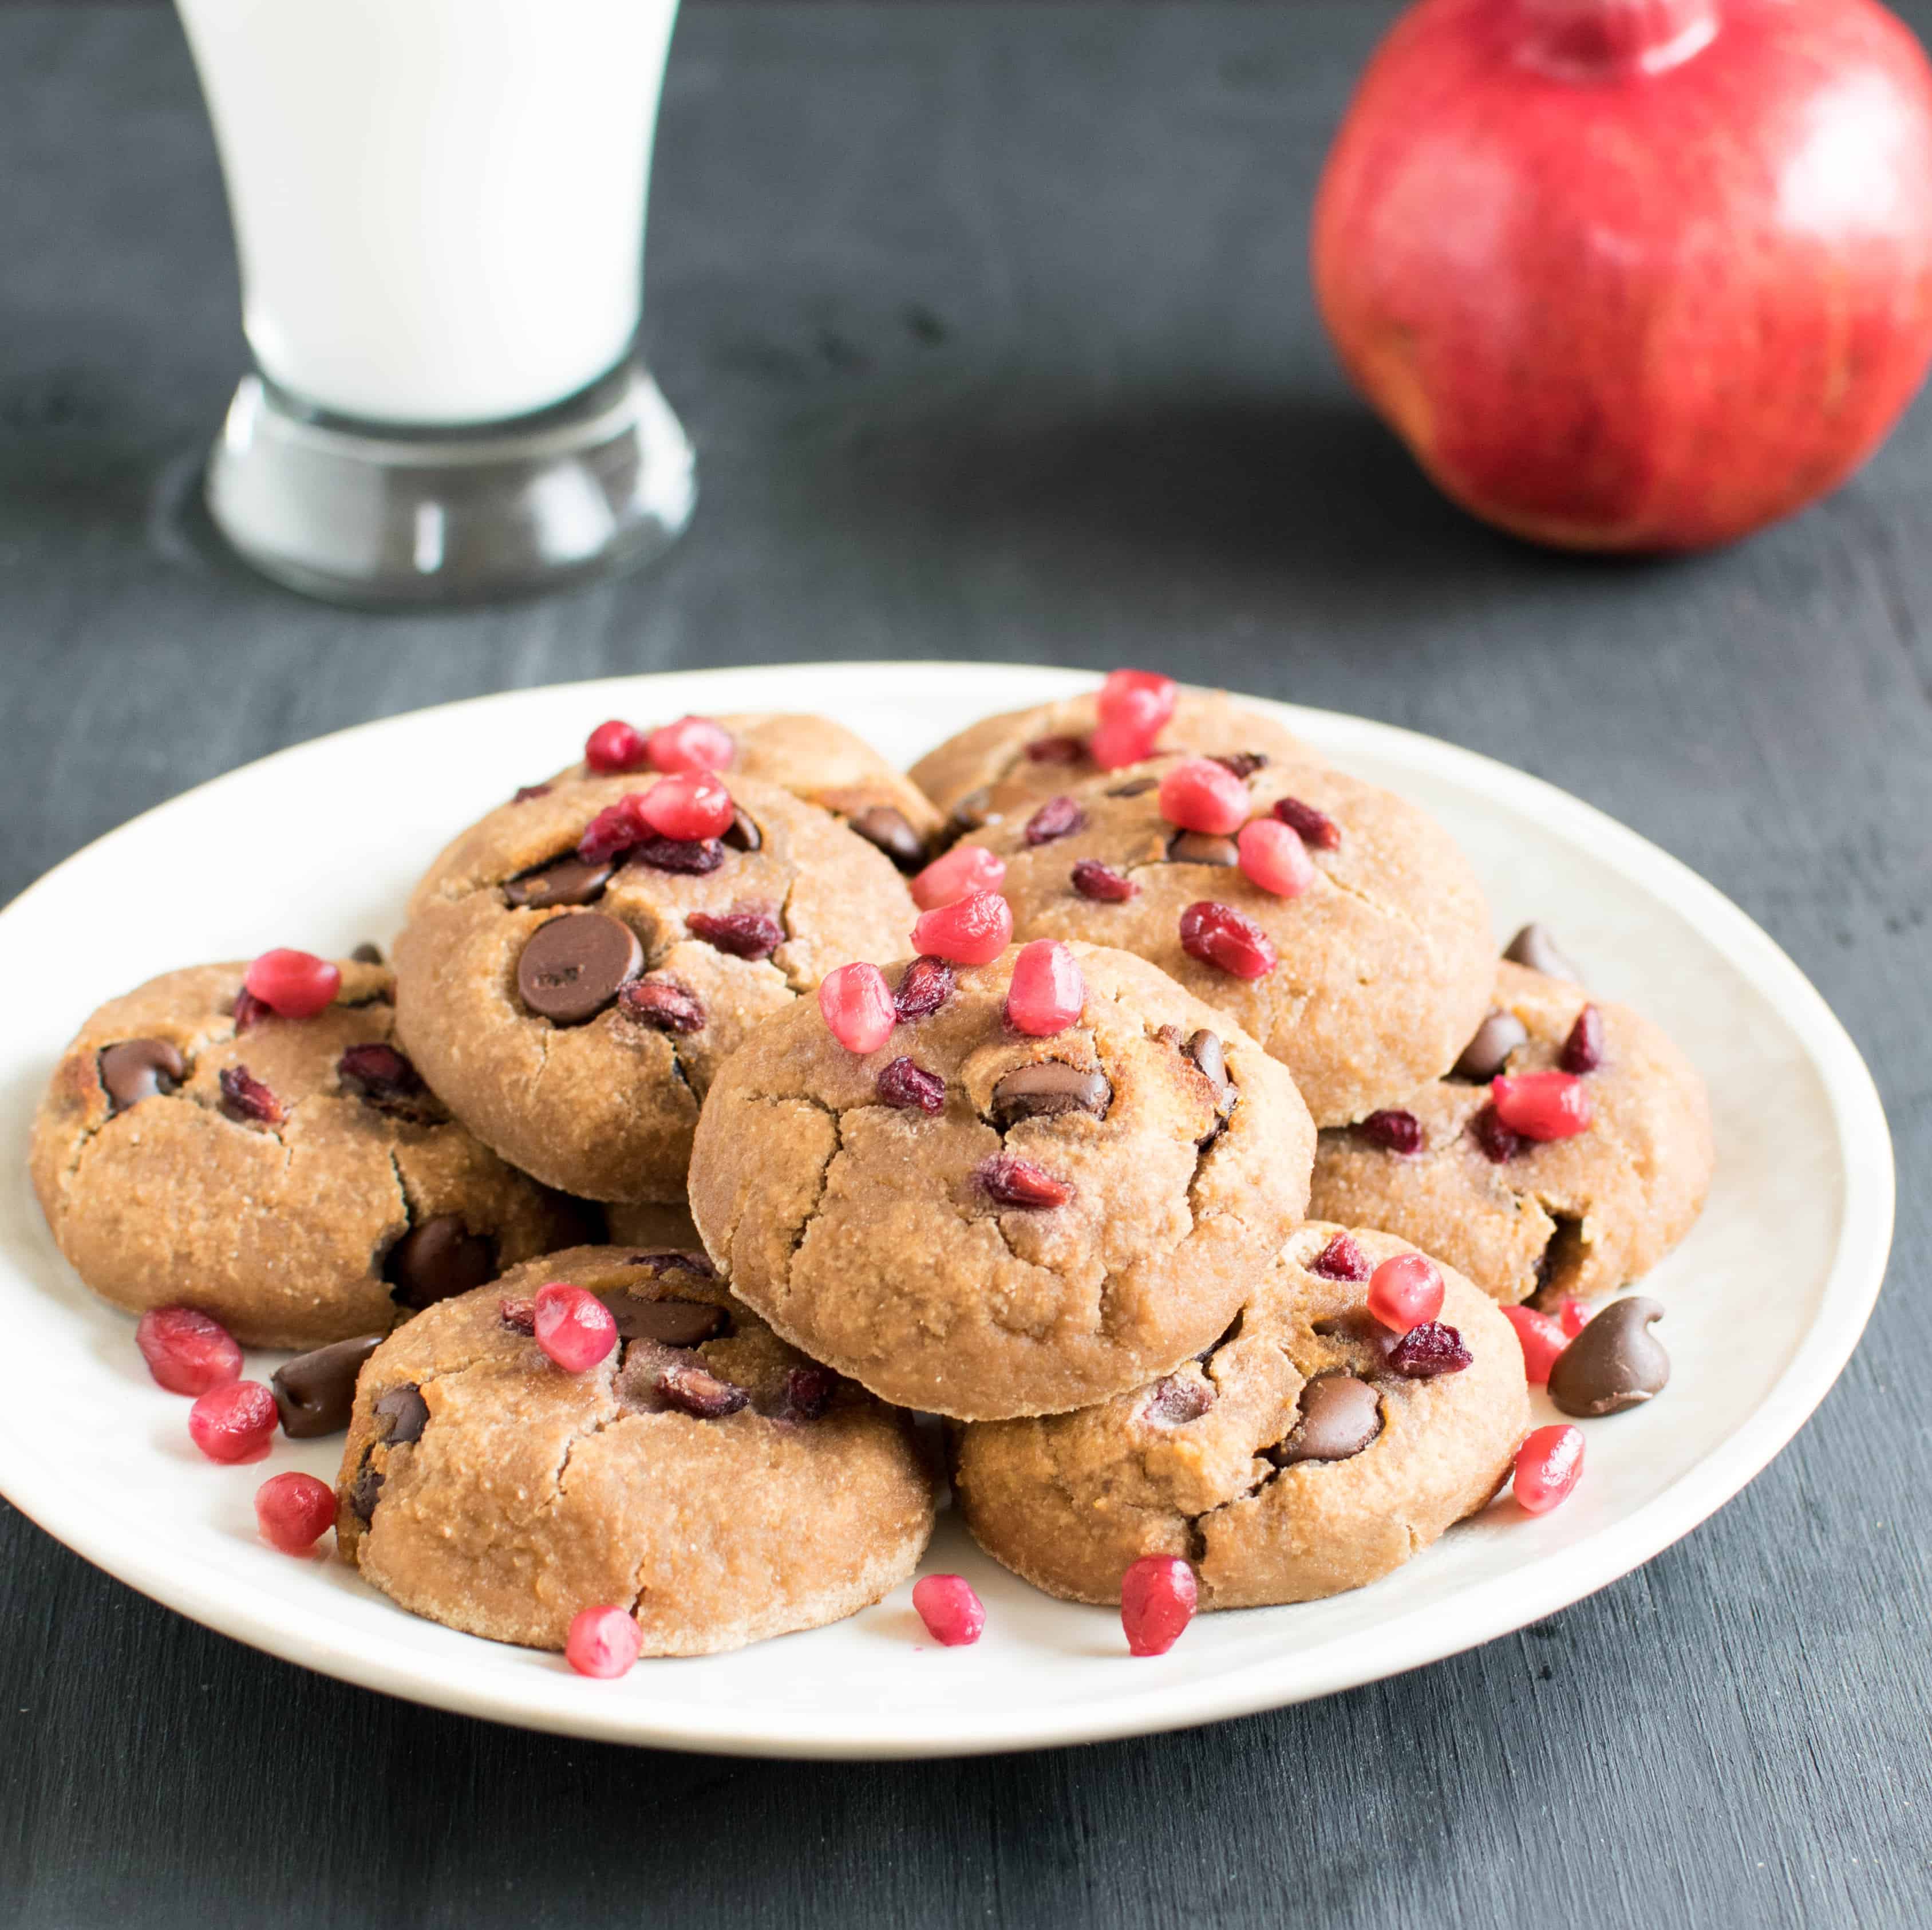 Pomegranate chocolate chip cookies